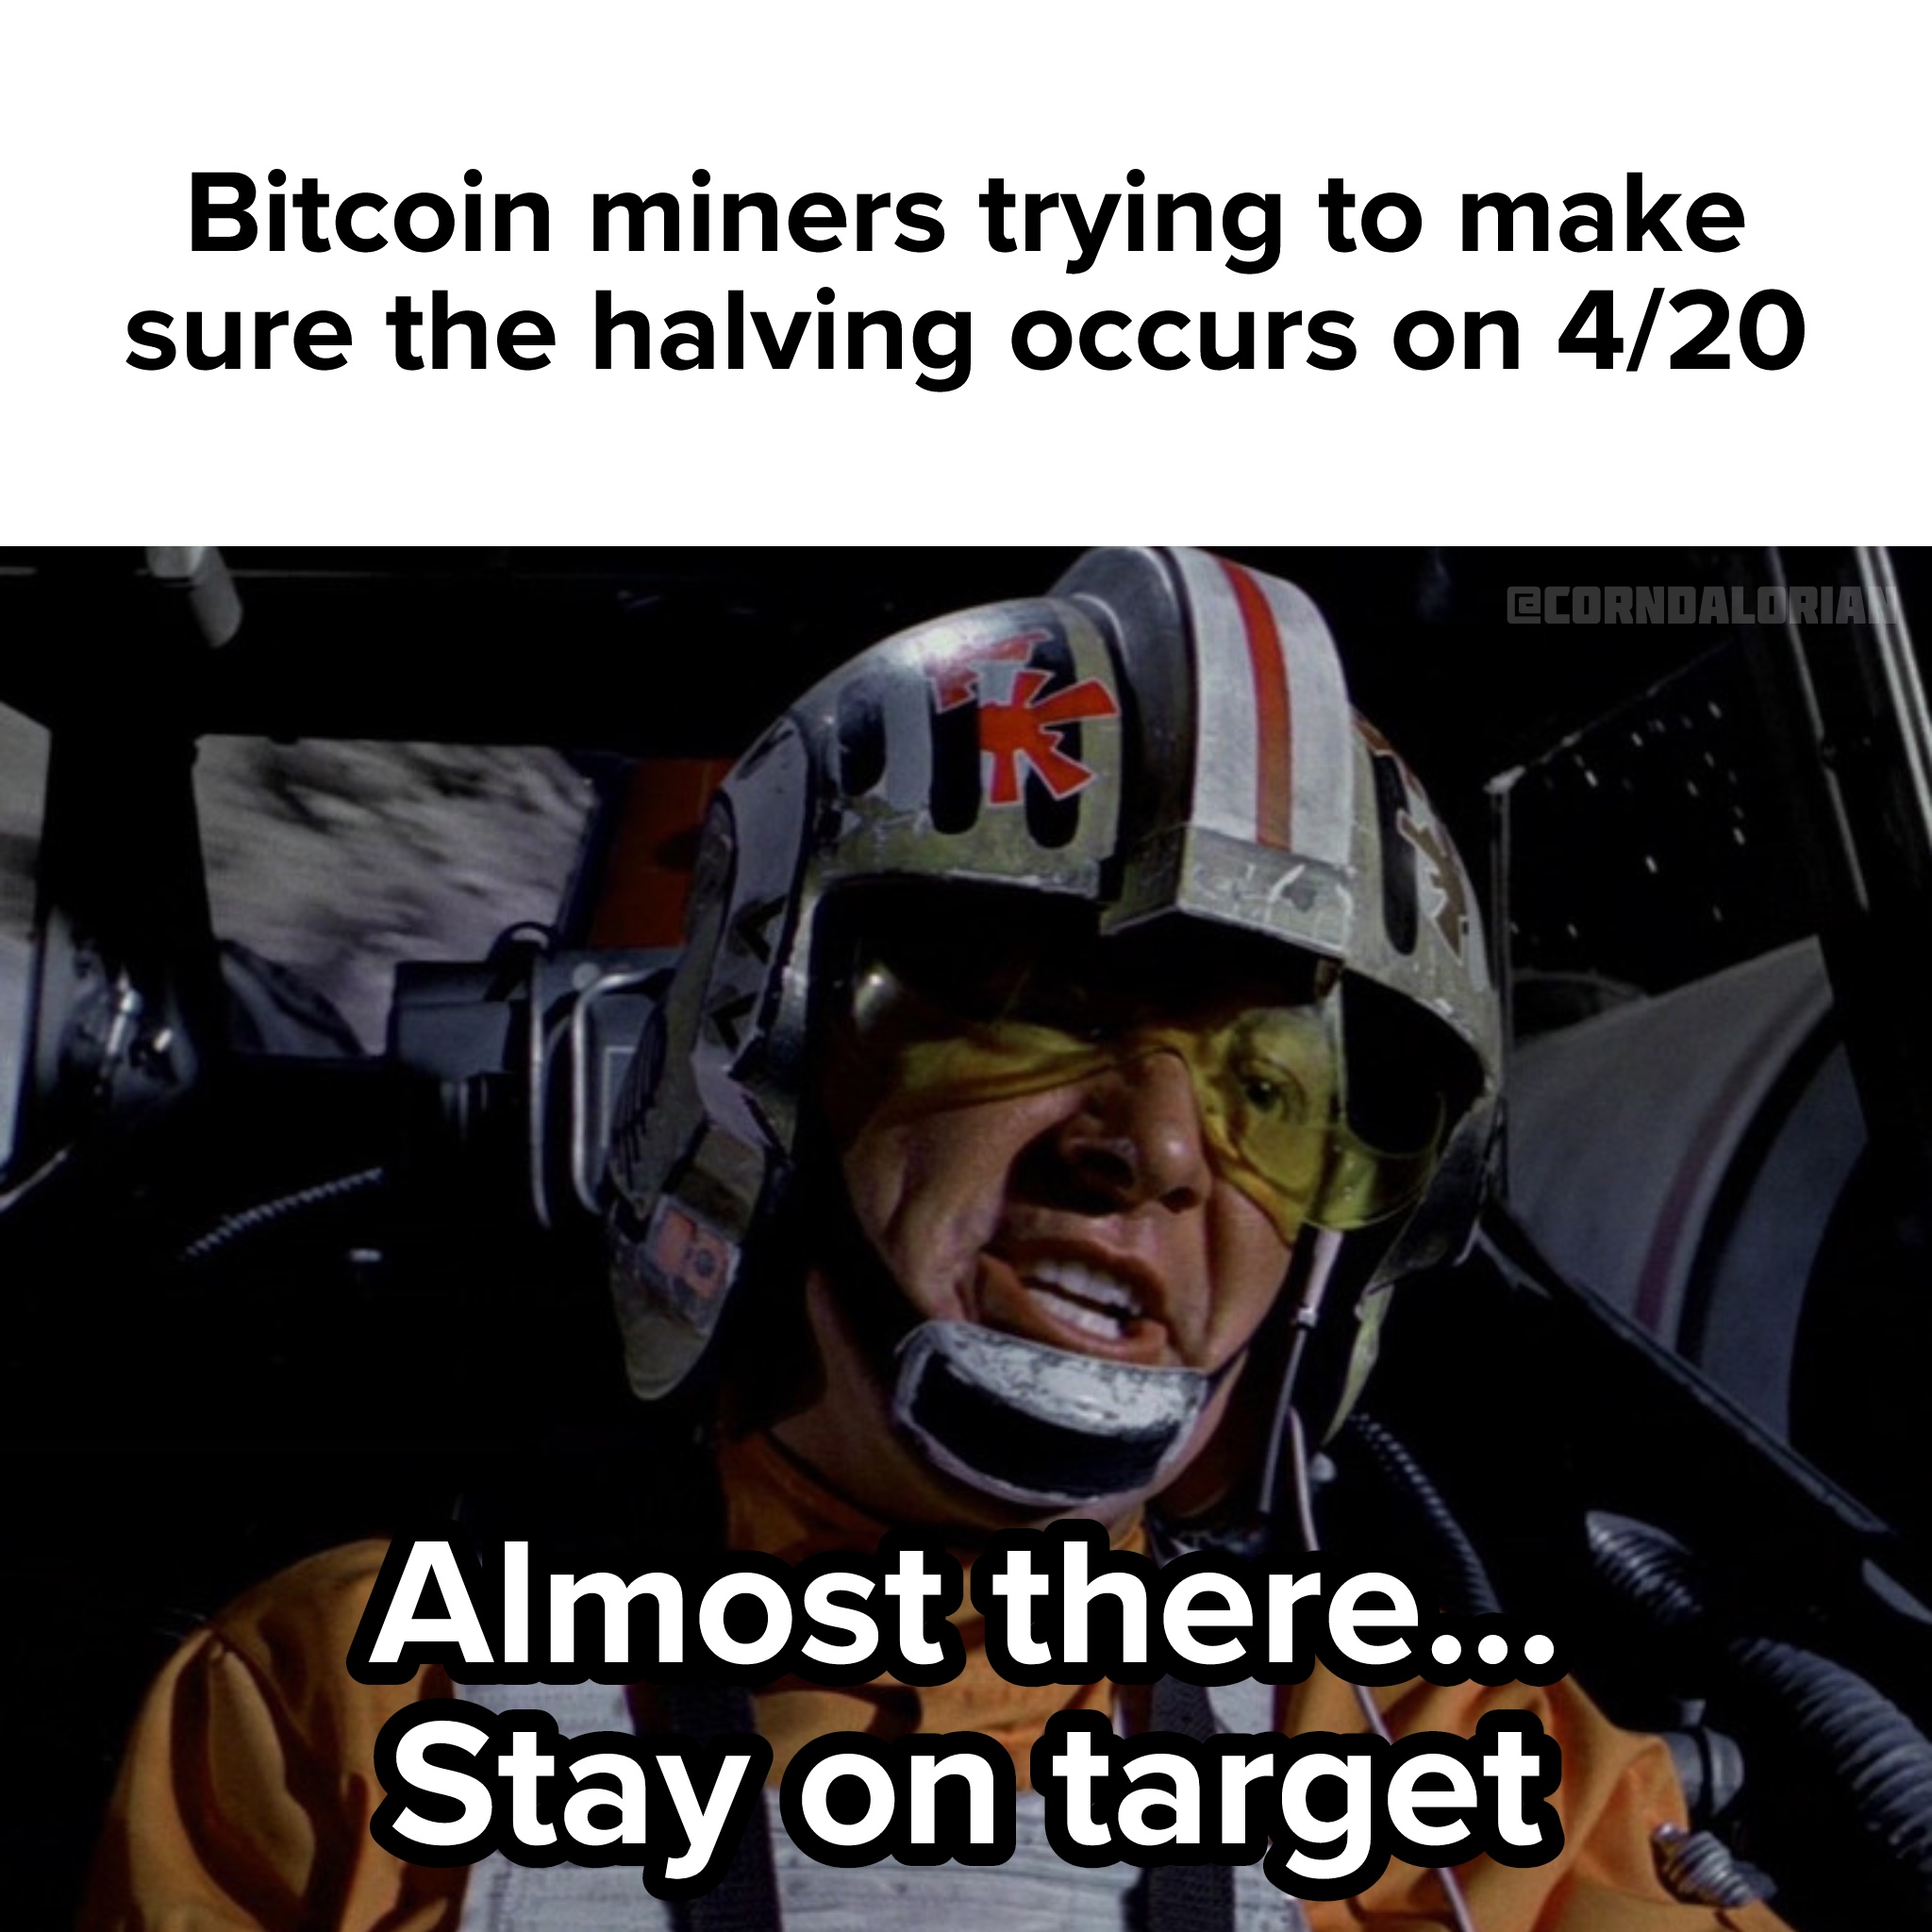 Bitcoin miners trying to make
sure the halving occurs on 4/20
|Alm ost there. . .
Stay .onta rg e